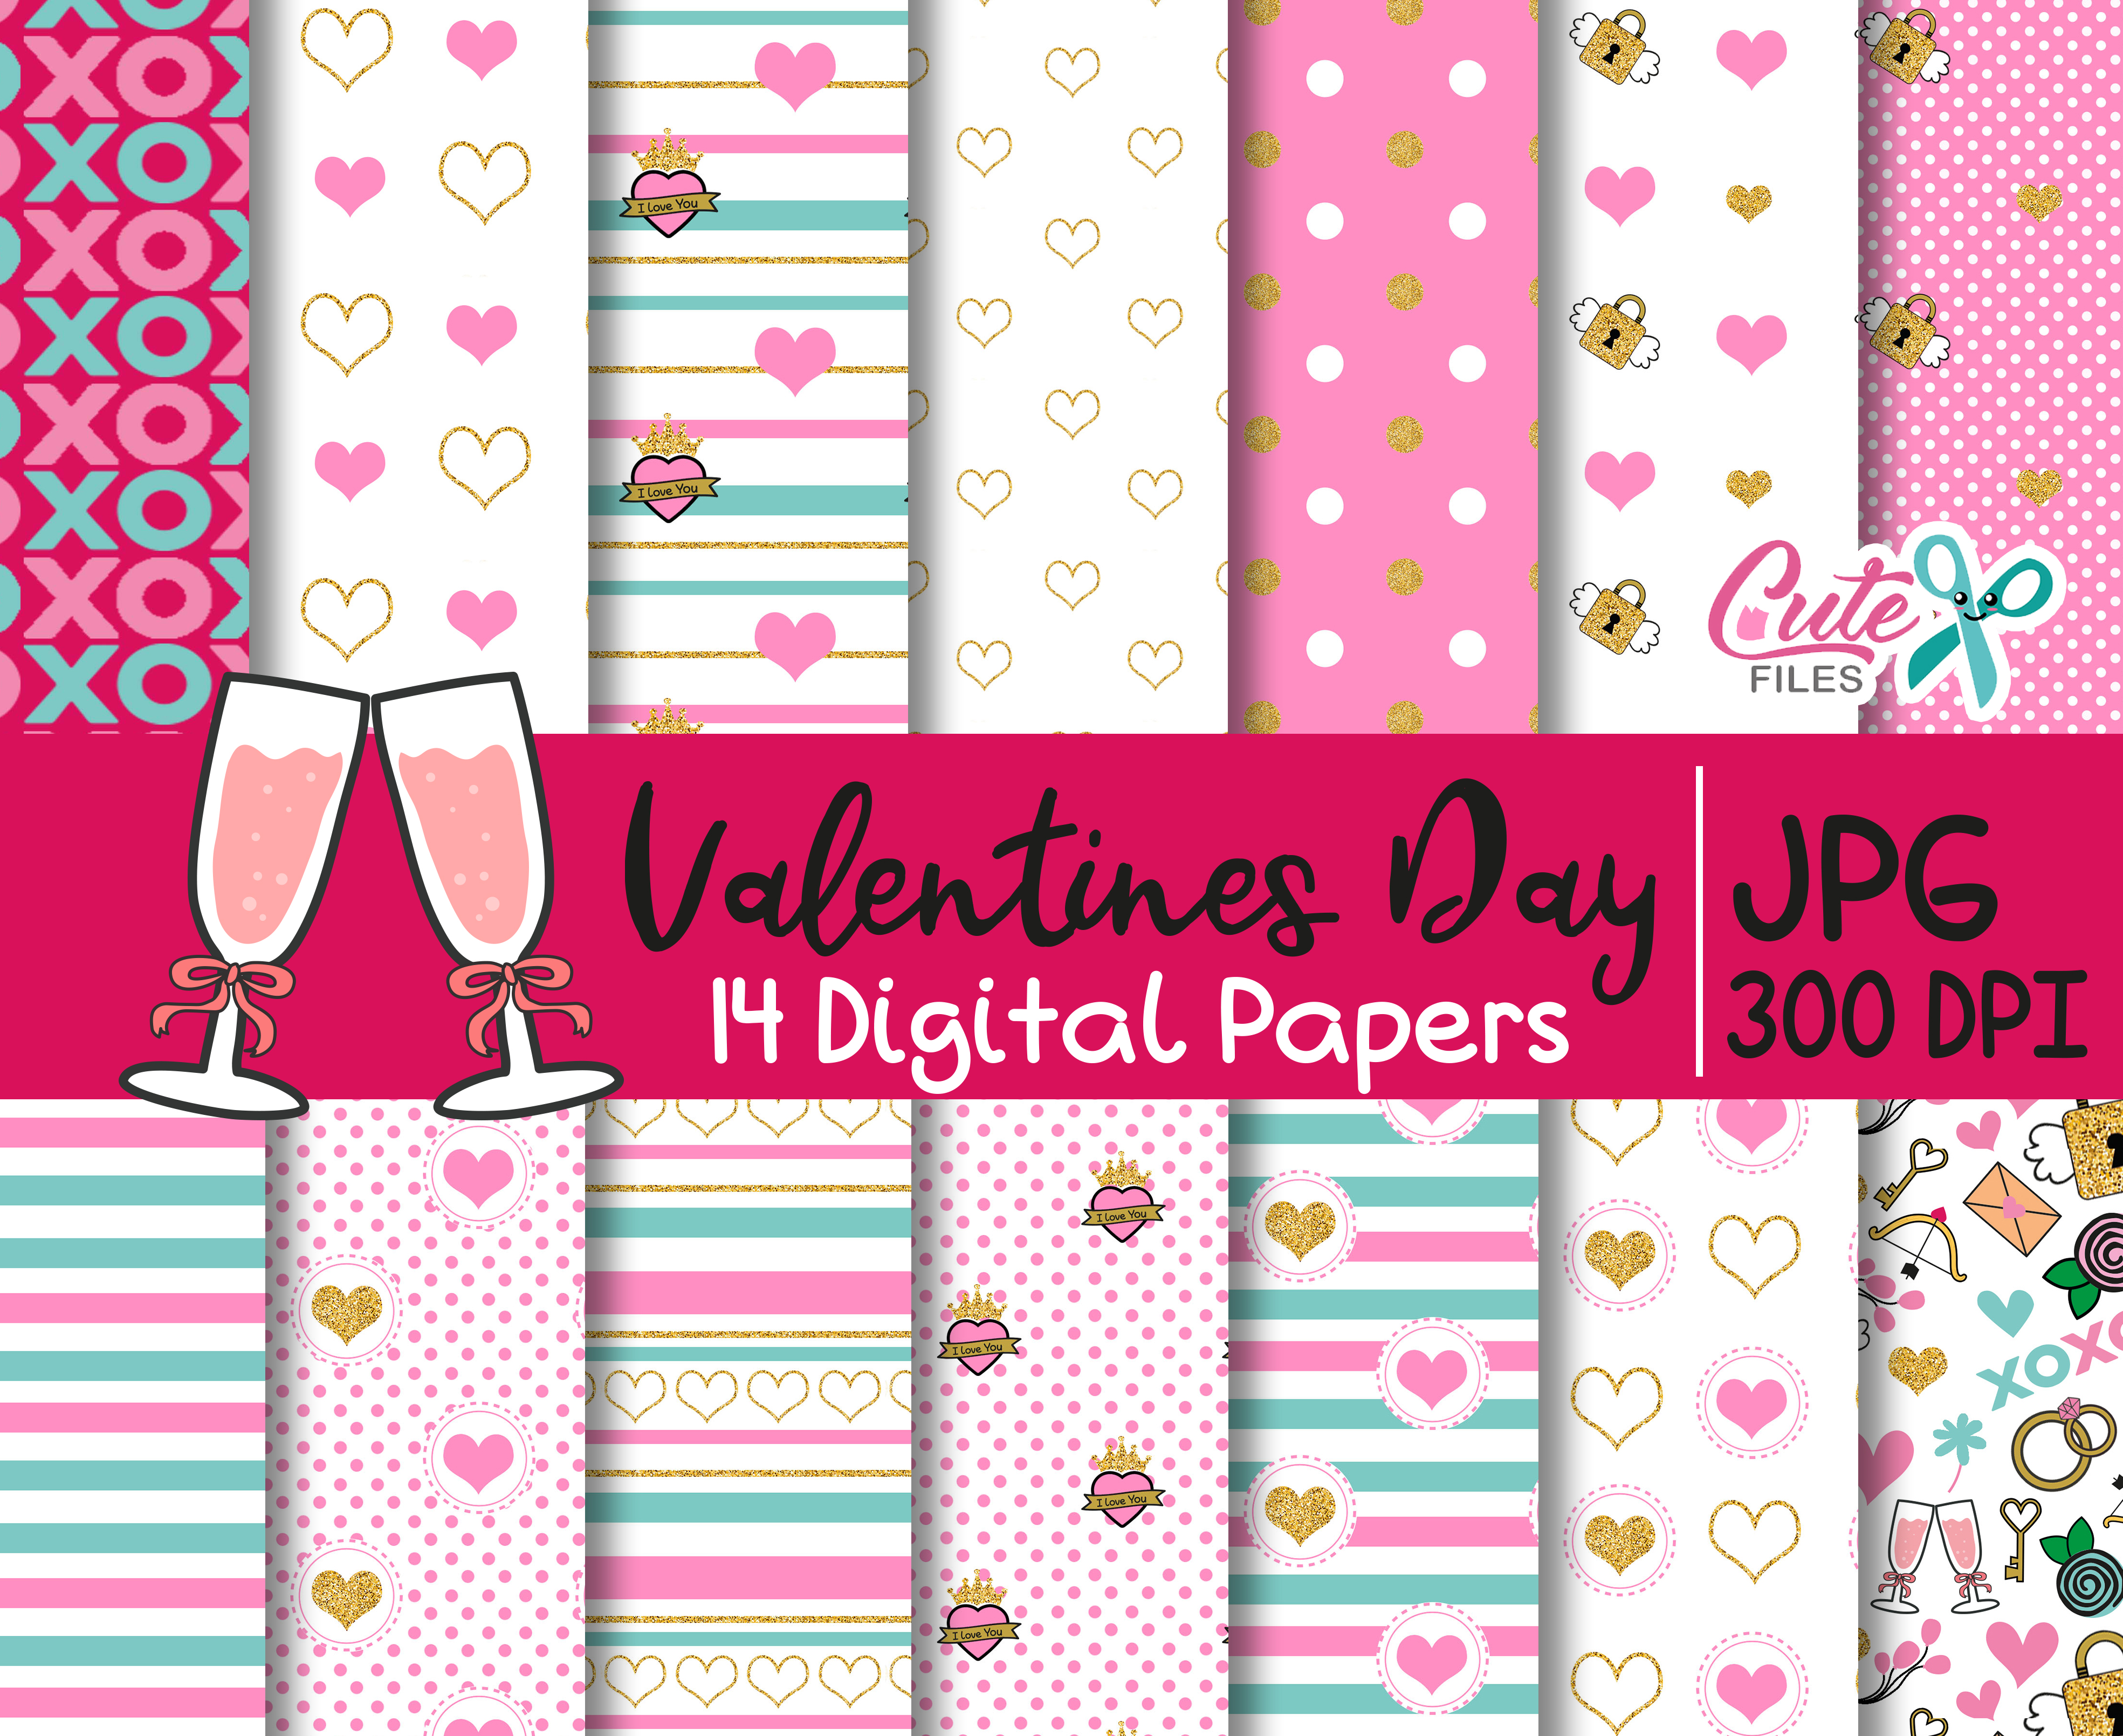 valentine-s-day-digital-paper-printable-cards-heart-romantic